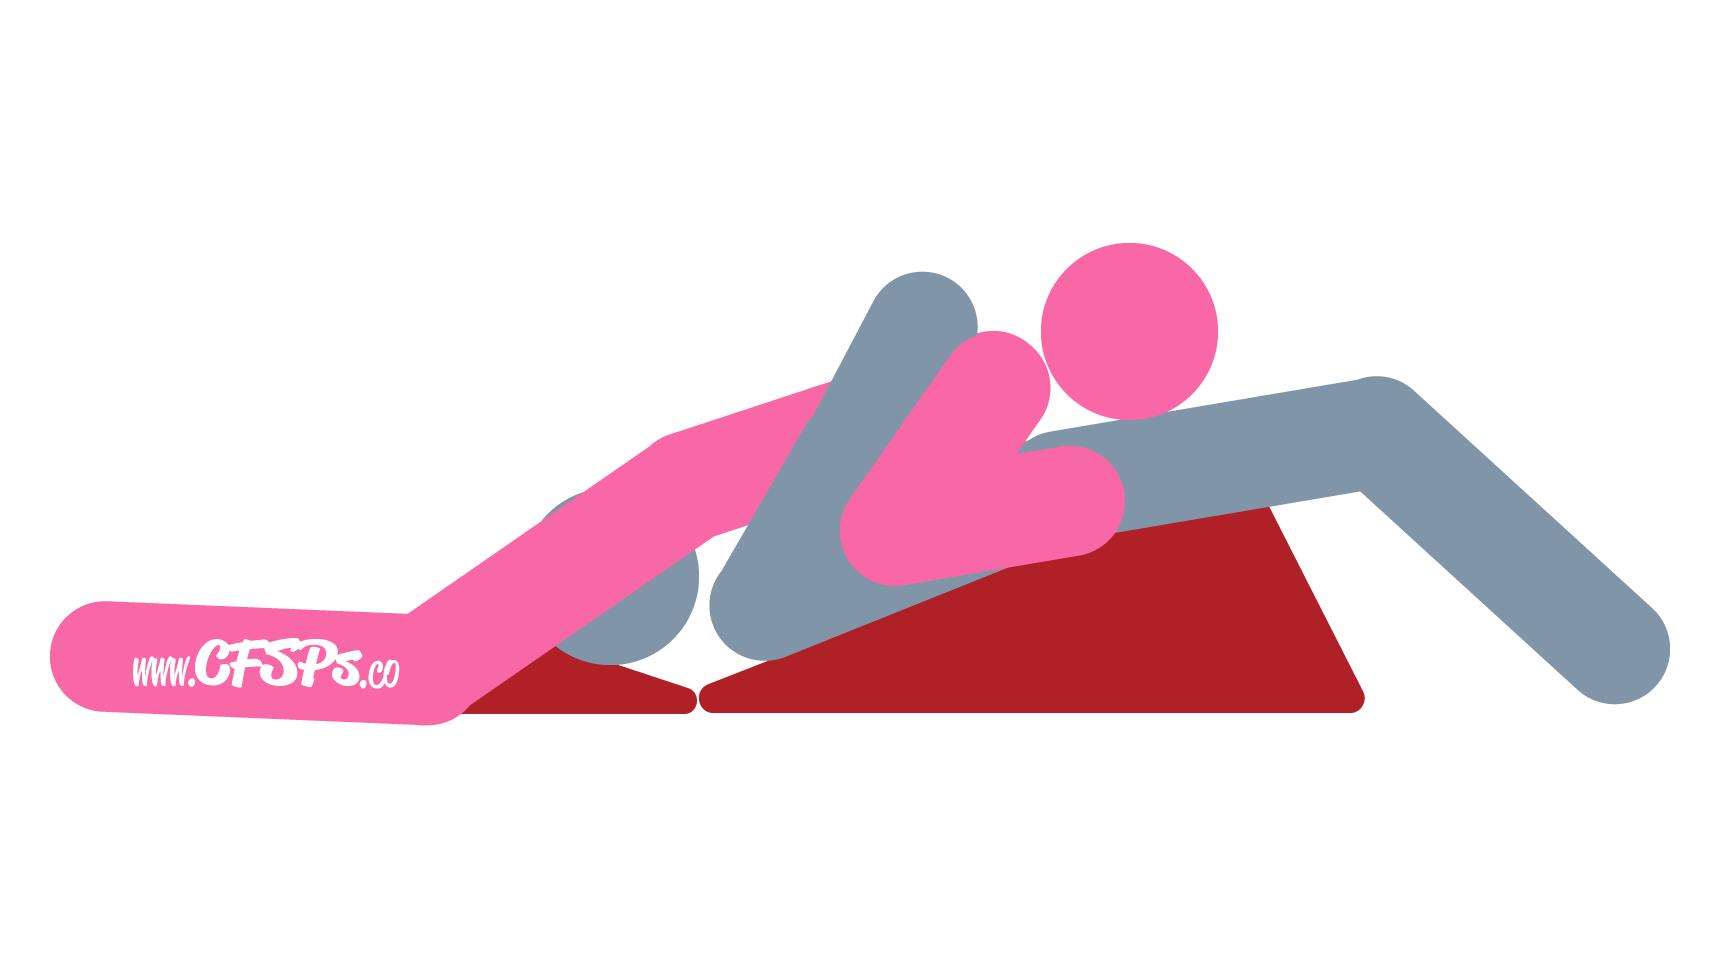 This stick figure image depicts a man and woman engaging in oral sex in the Bridge 2 oral sex position. The man is lying on his back with a Liberator Ramp sex pillow under his body with the high side at his butt and a Liberator Wedge sex pillow under his head. The woman is straddling his face and lying forward on his pelvis.